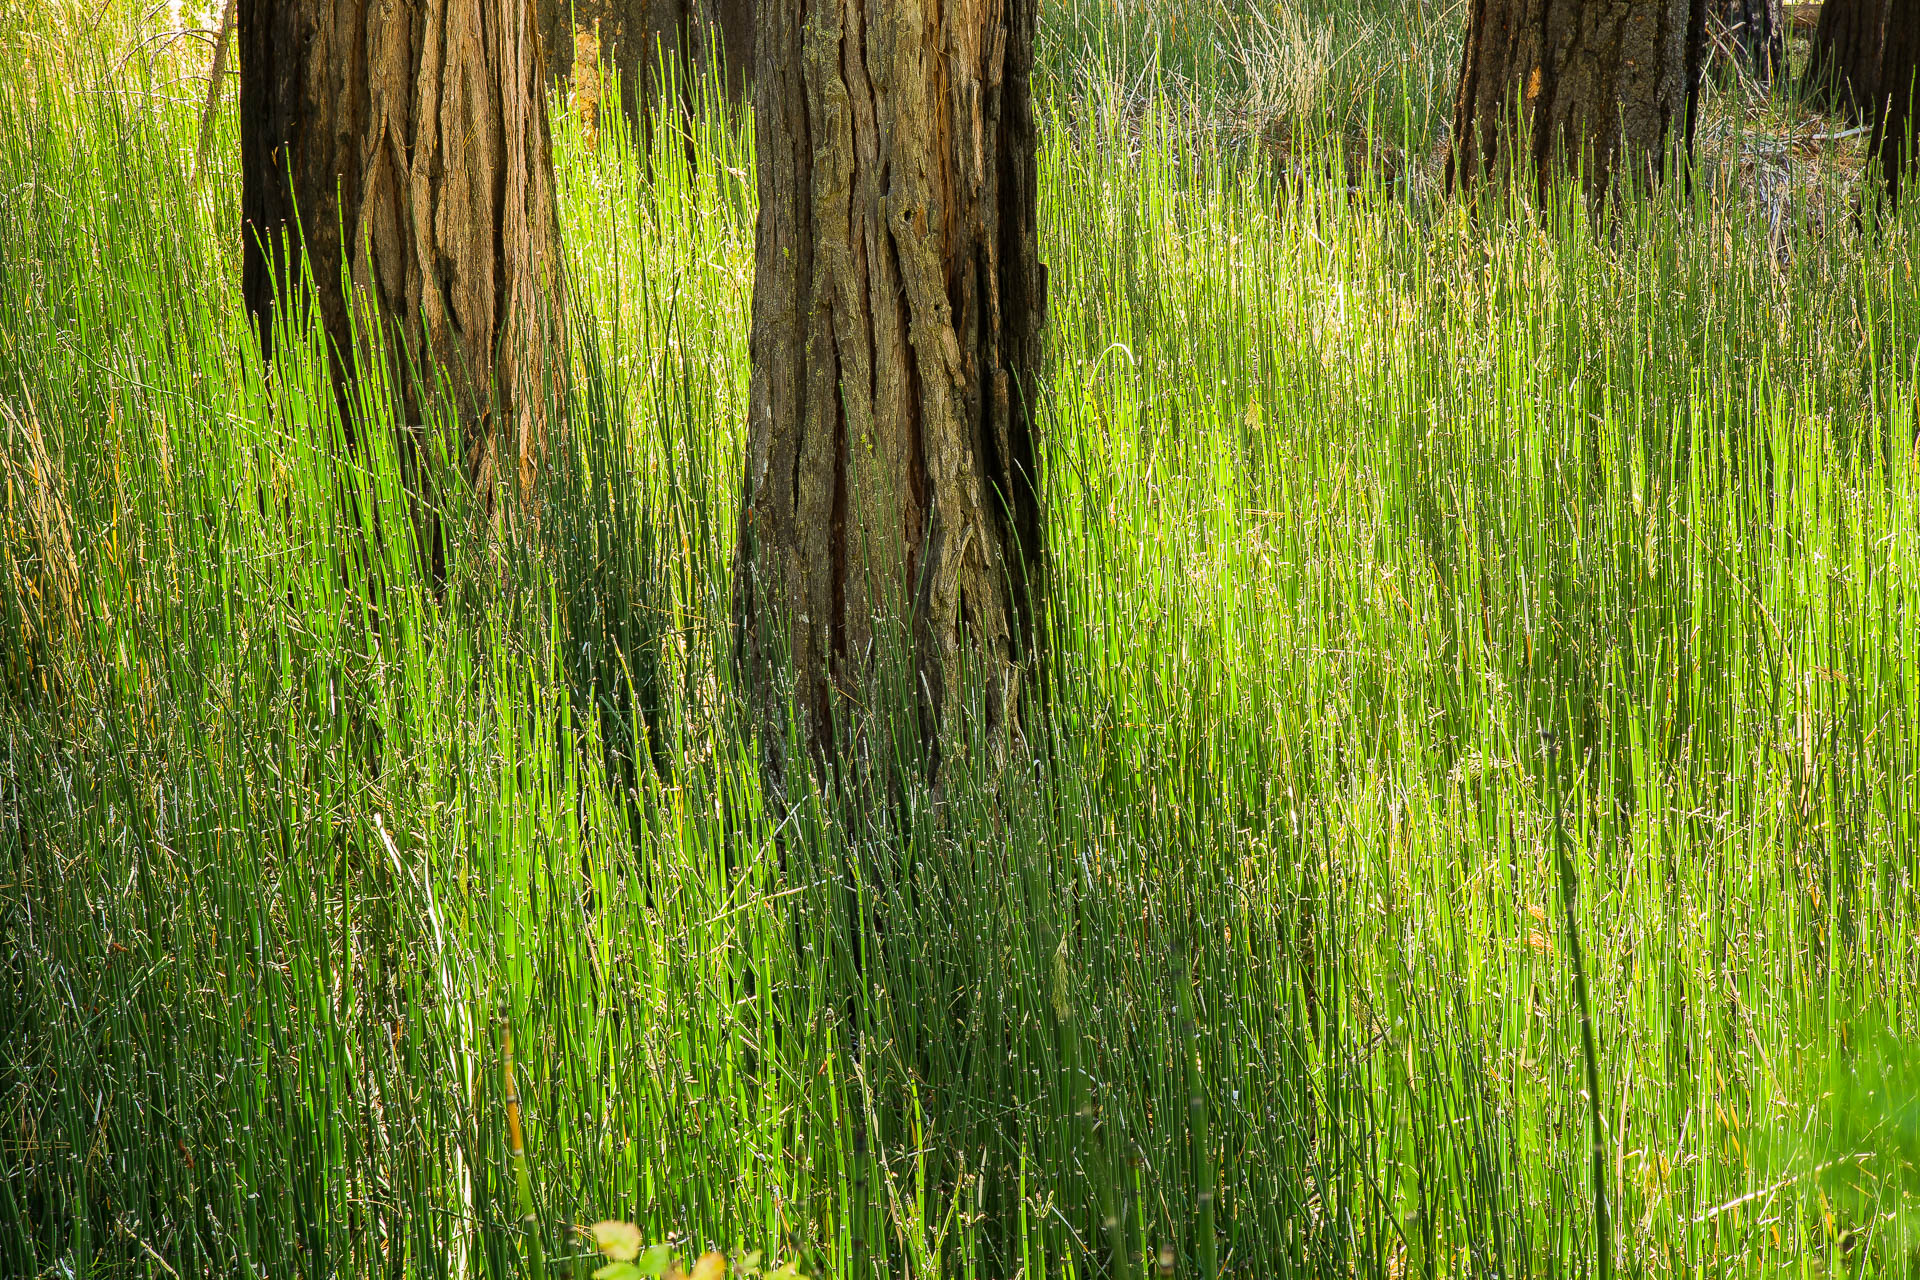 Grasses and pines (Yosemite Valley)